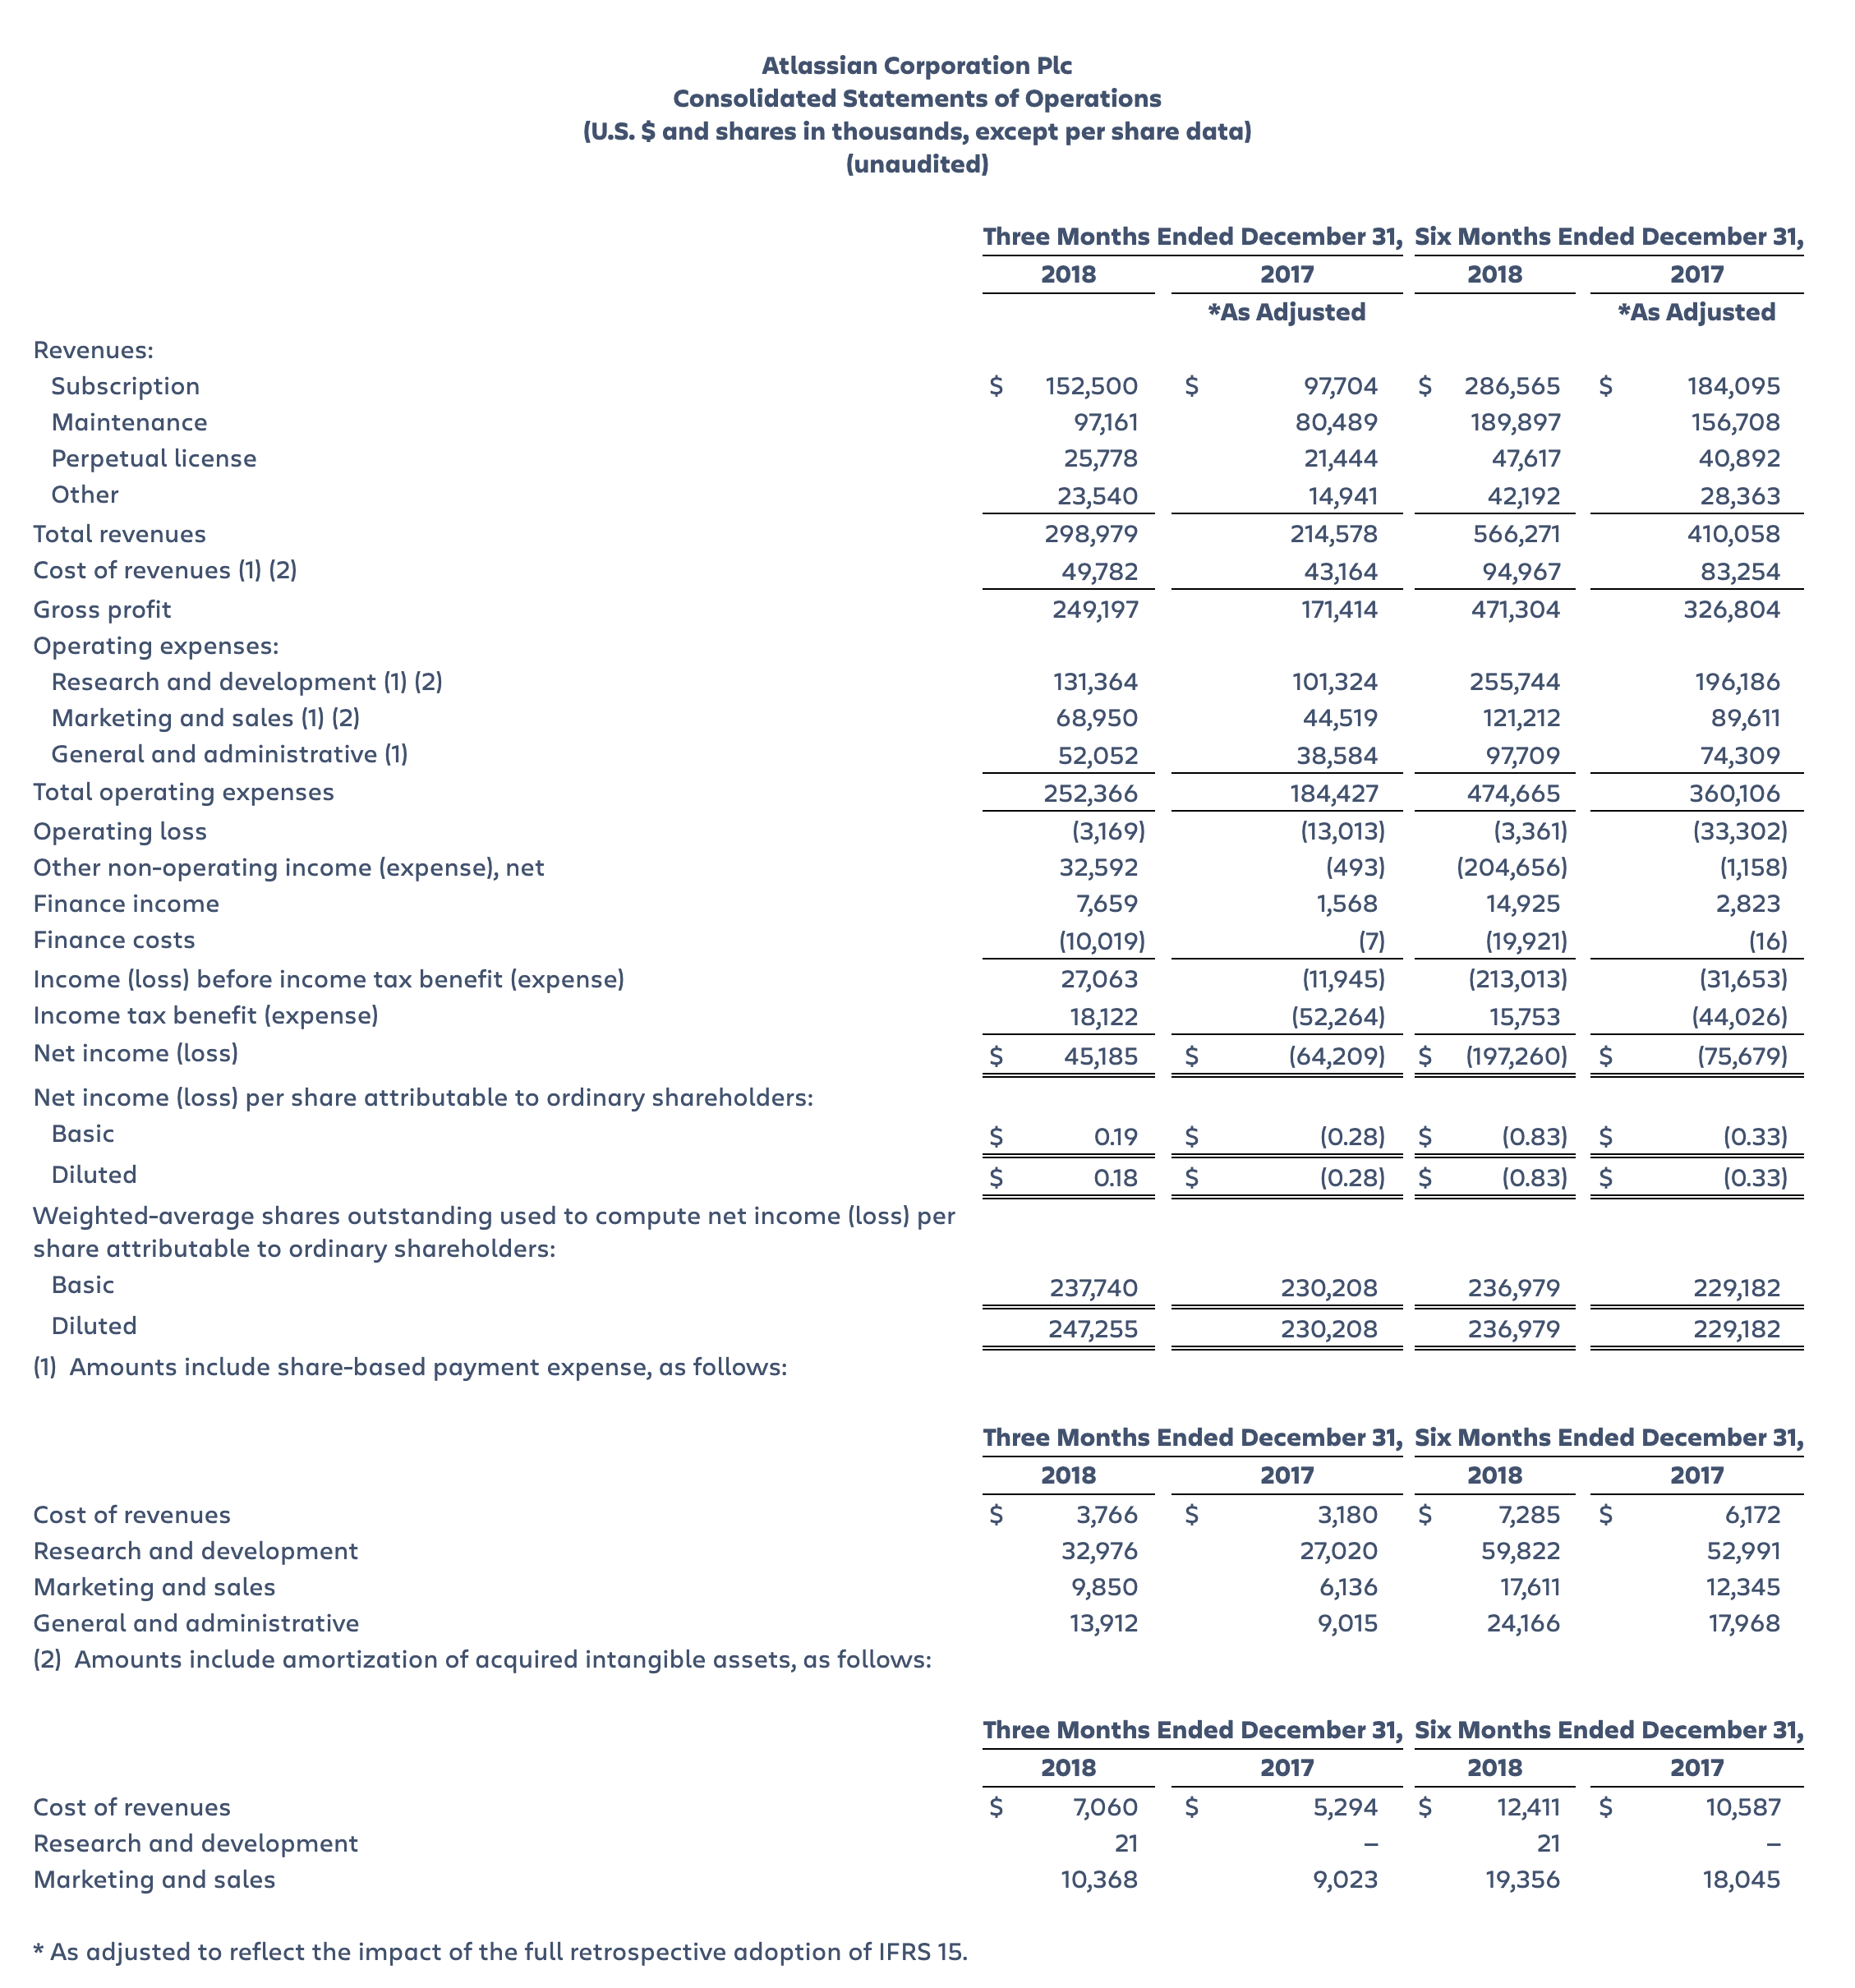 Atlassian Consolidated Statements of Operations, Second Quarter Fiscal Year 2019